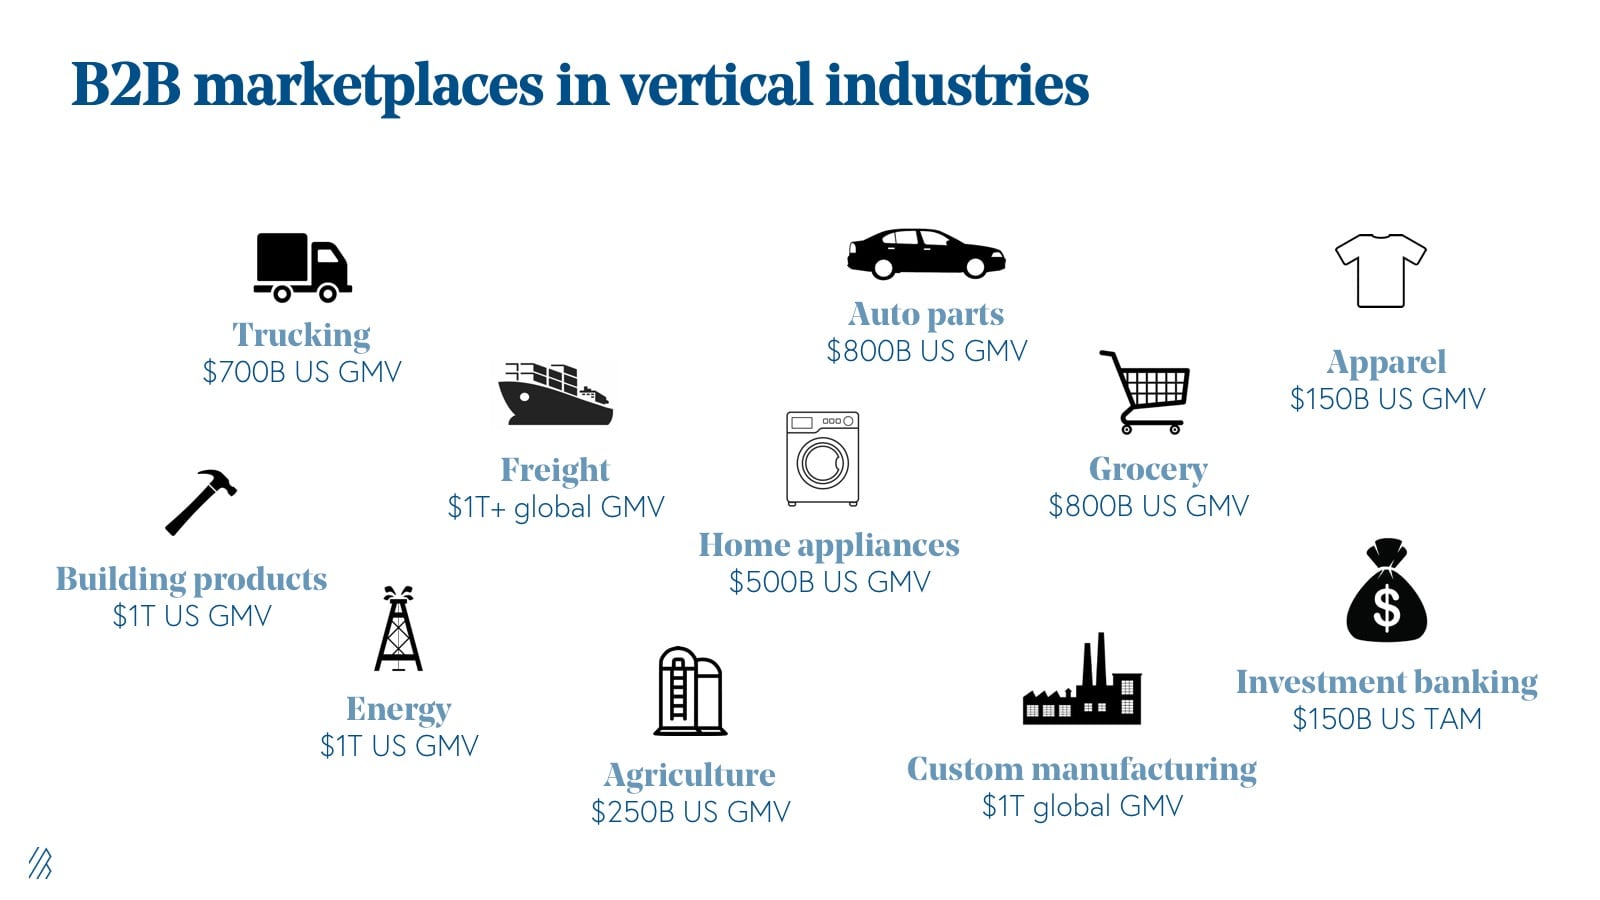 B2B marketplaces in vertical industries